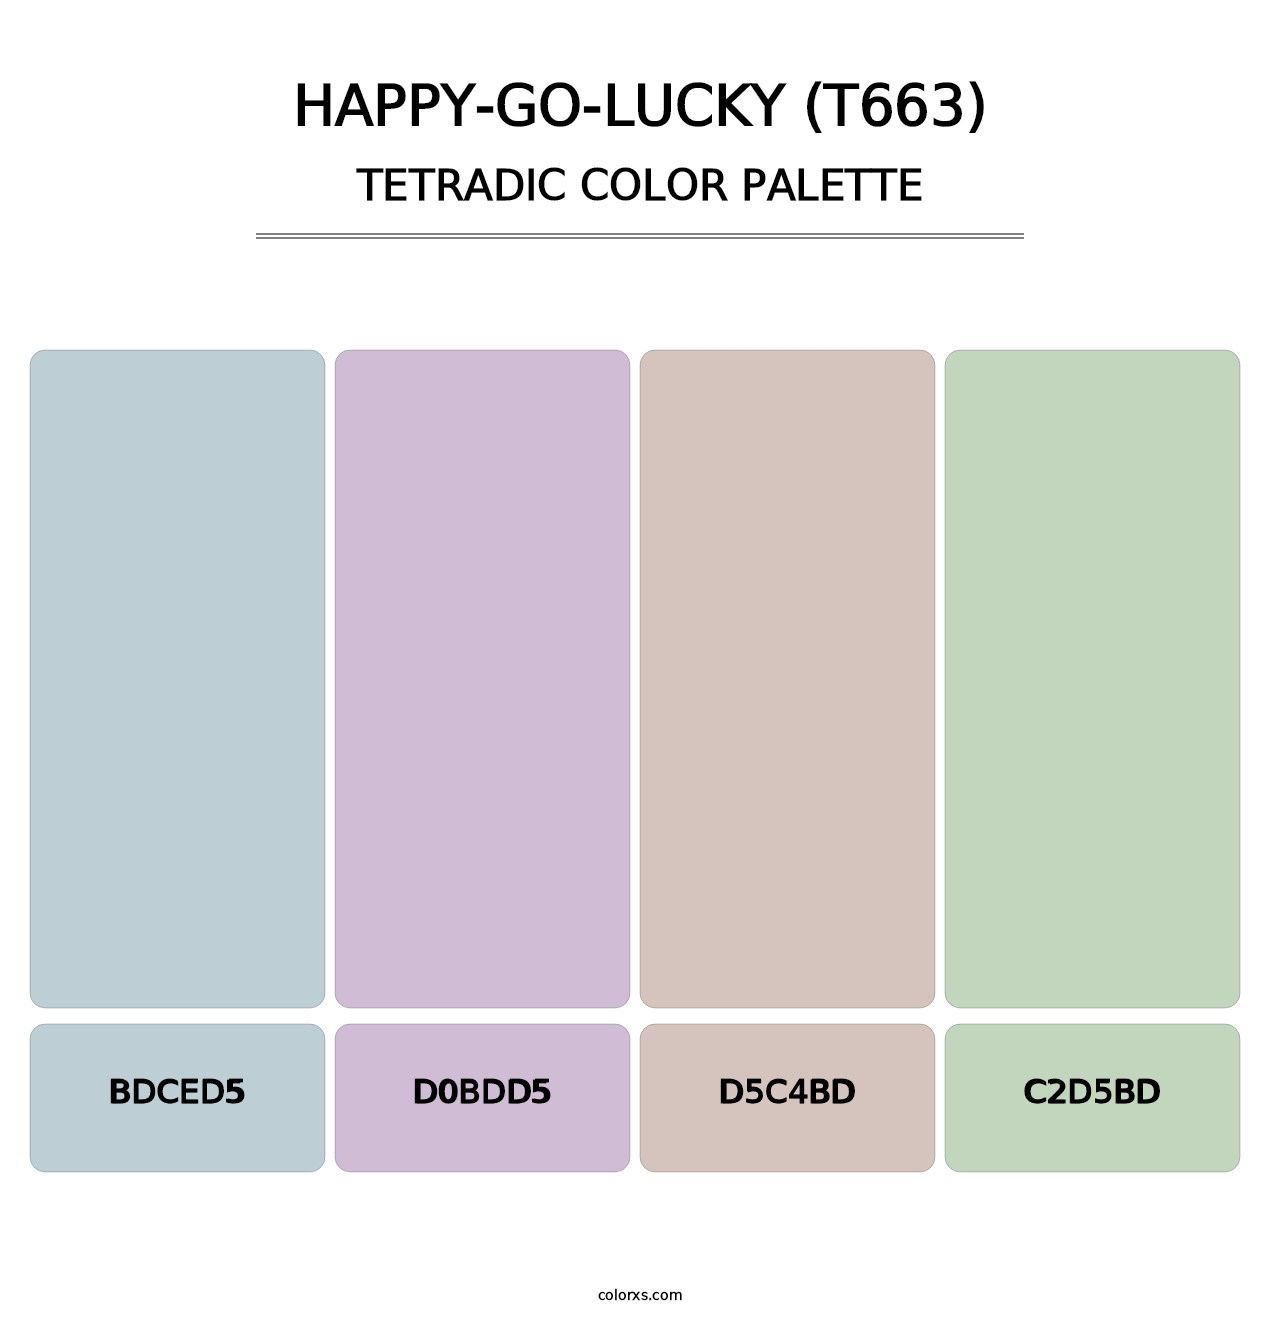 Happy-Go-Lucky (T663) - Tetradic Color Palette